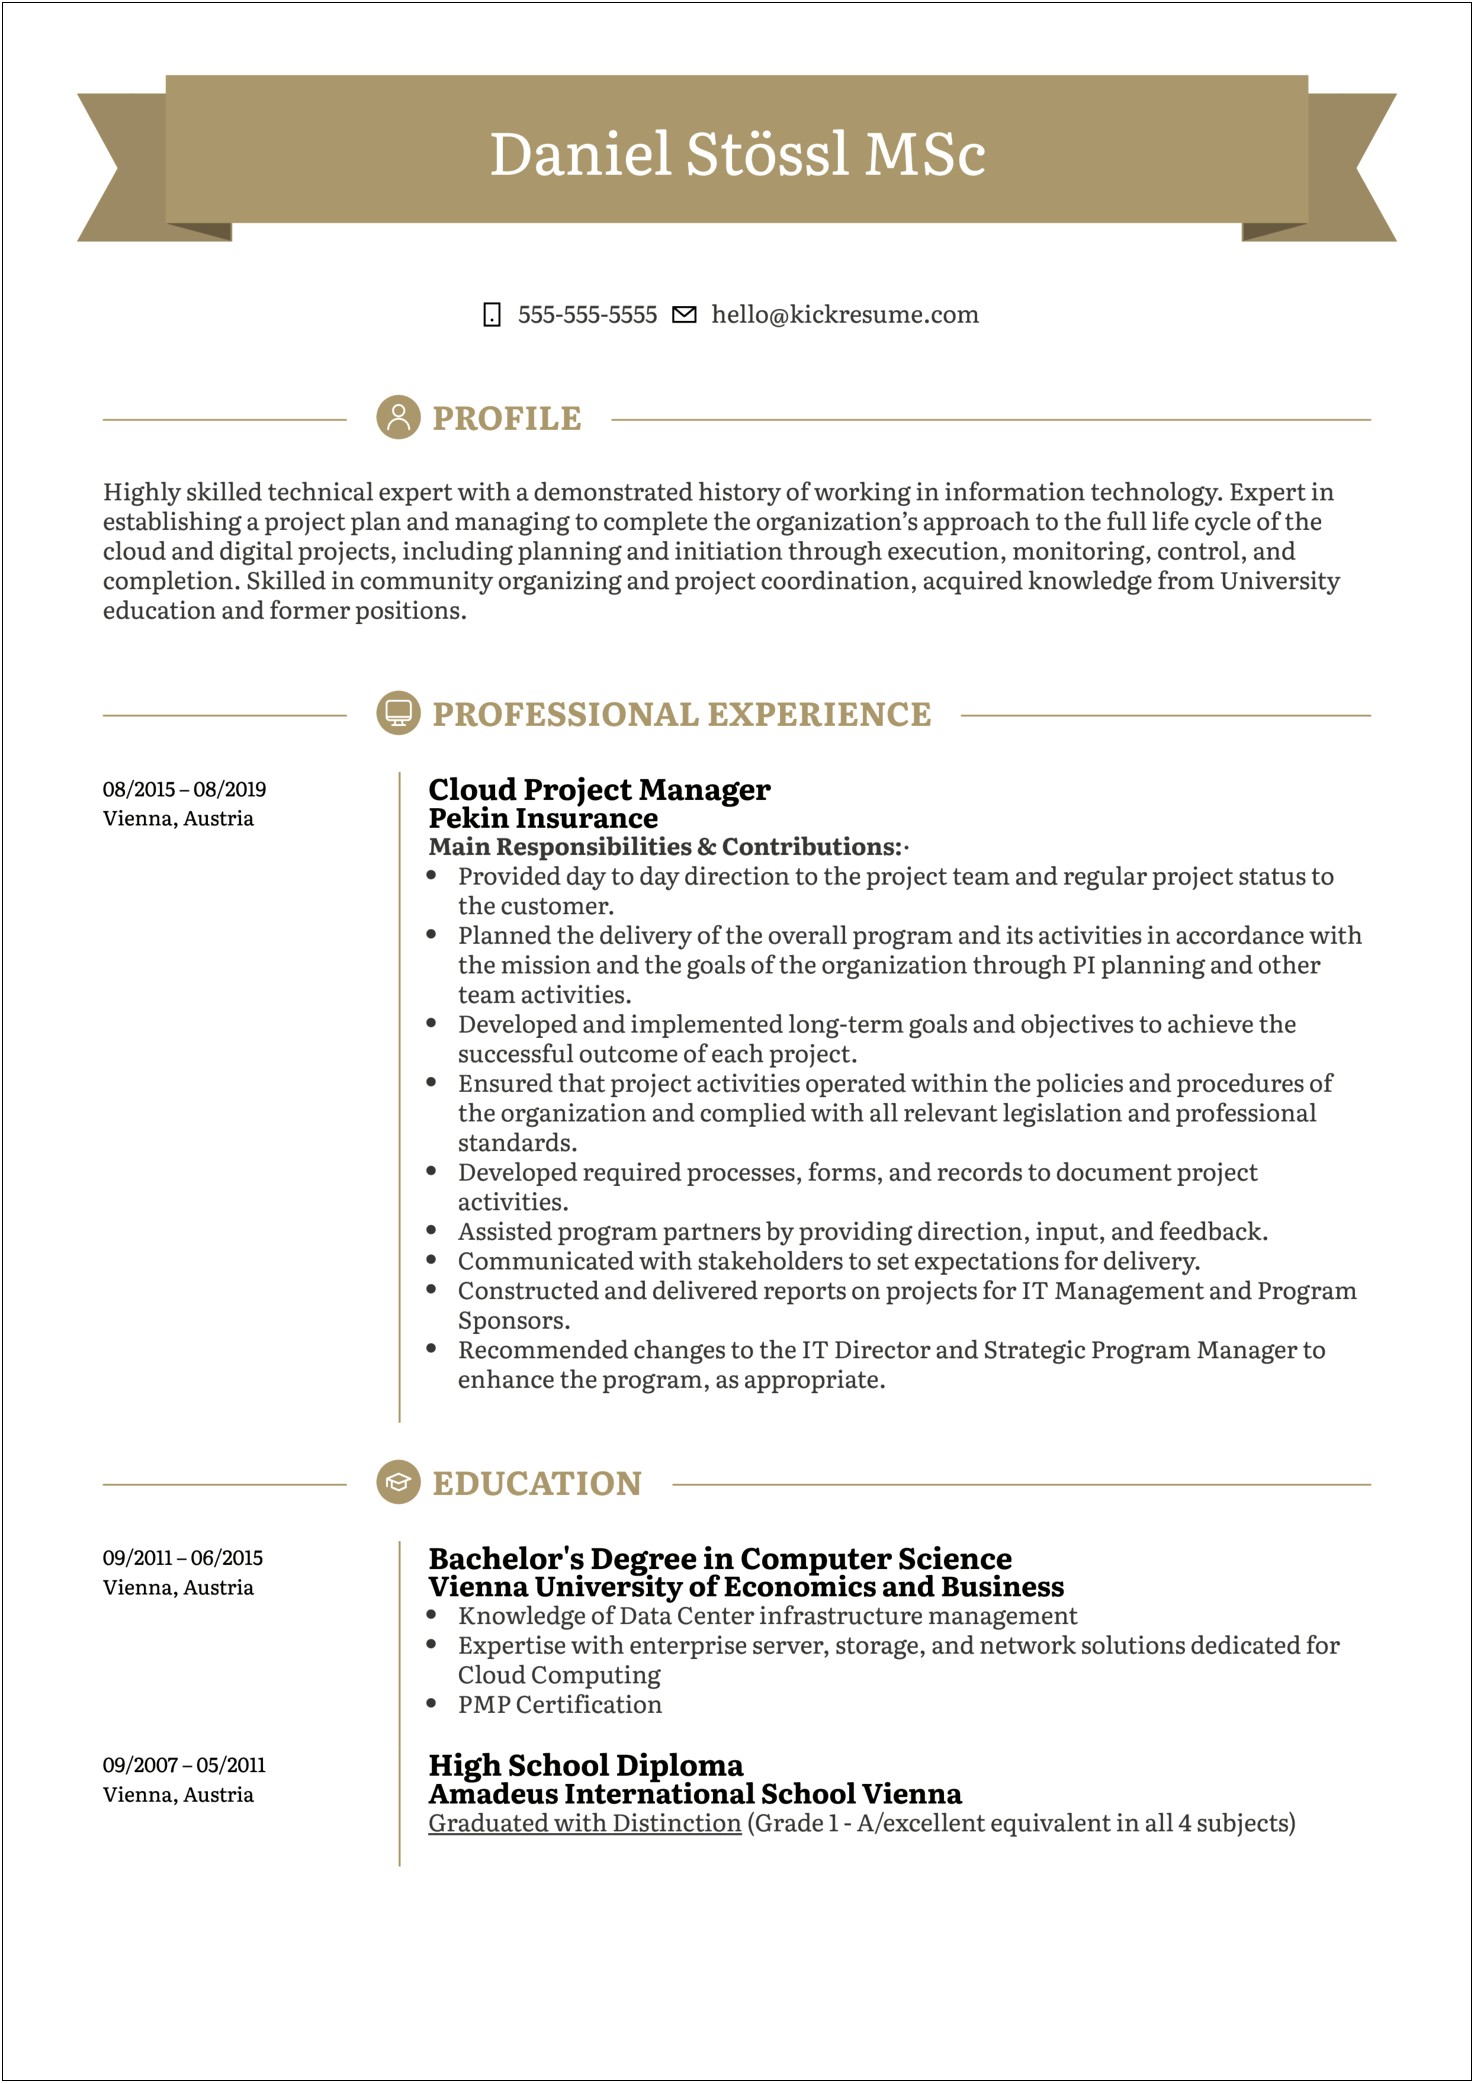 Windows 10 Deployment Project Manager Resume